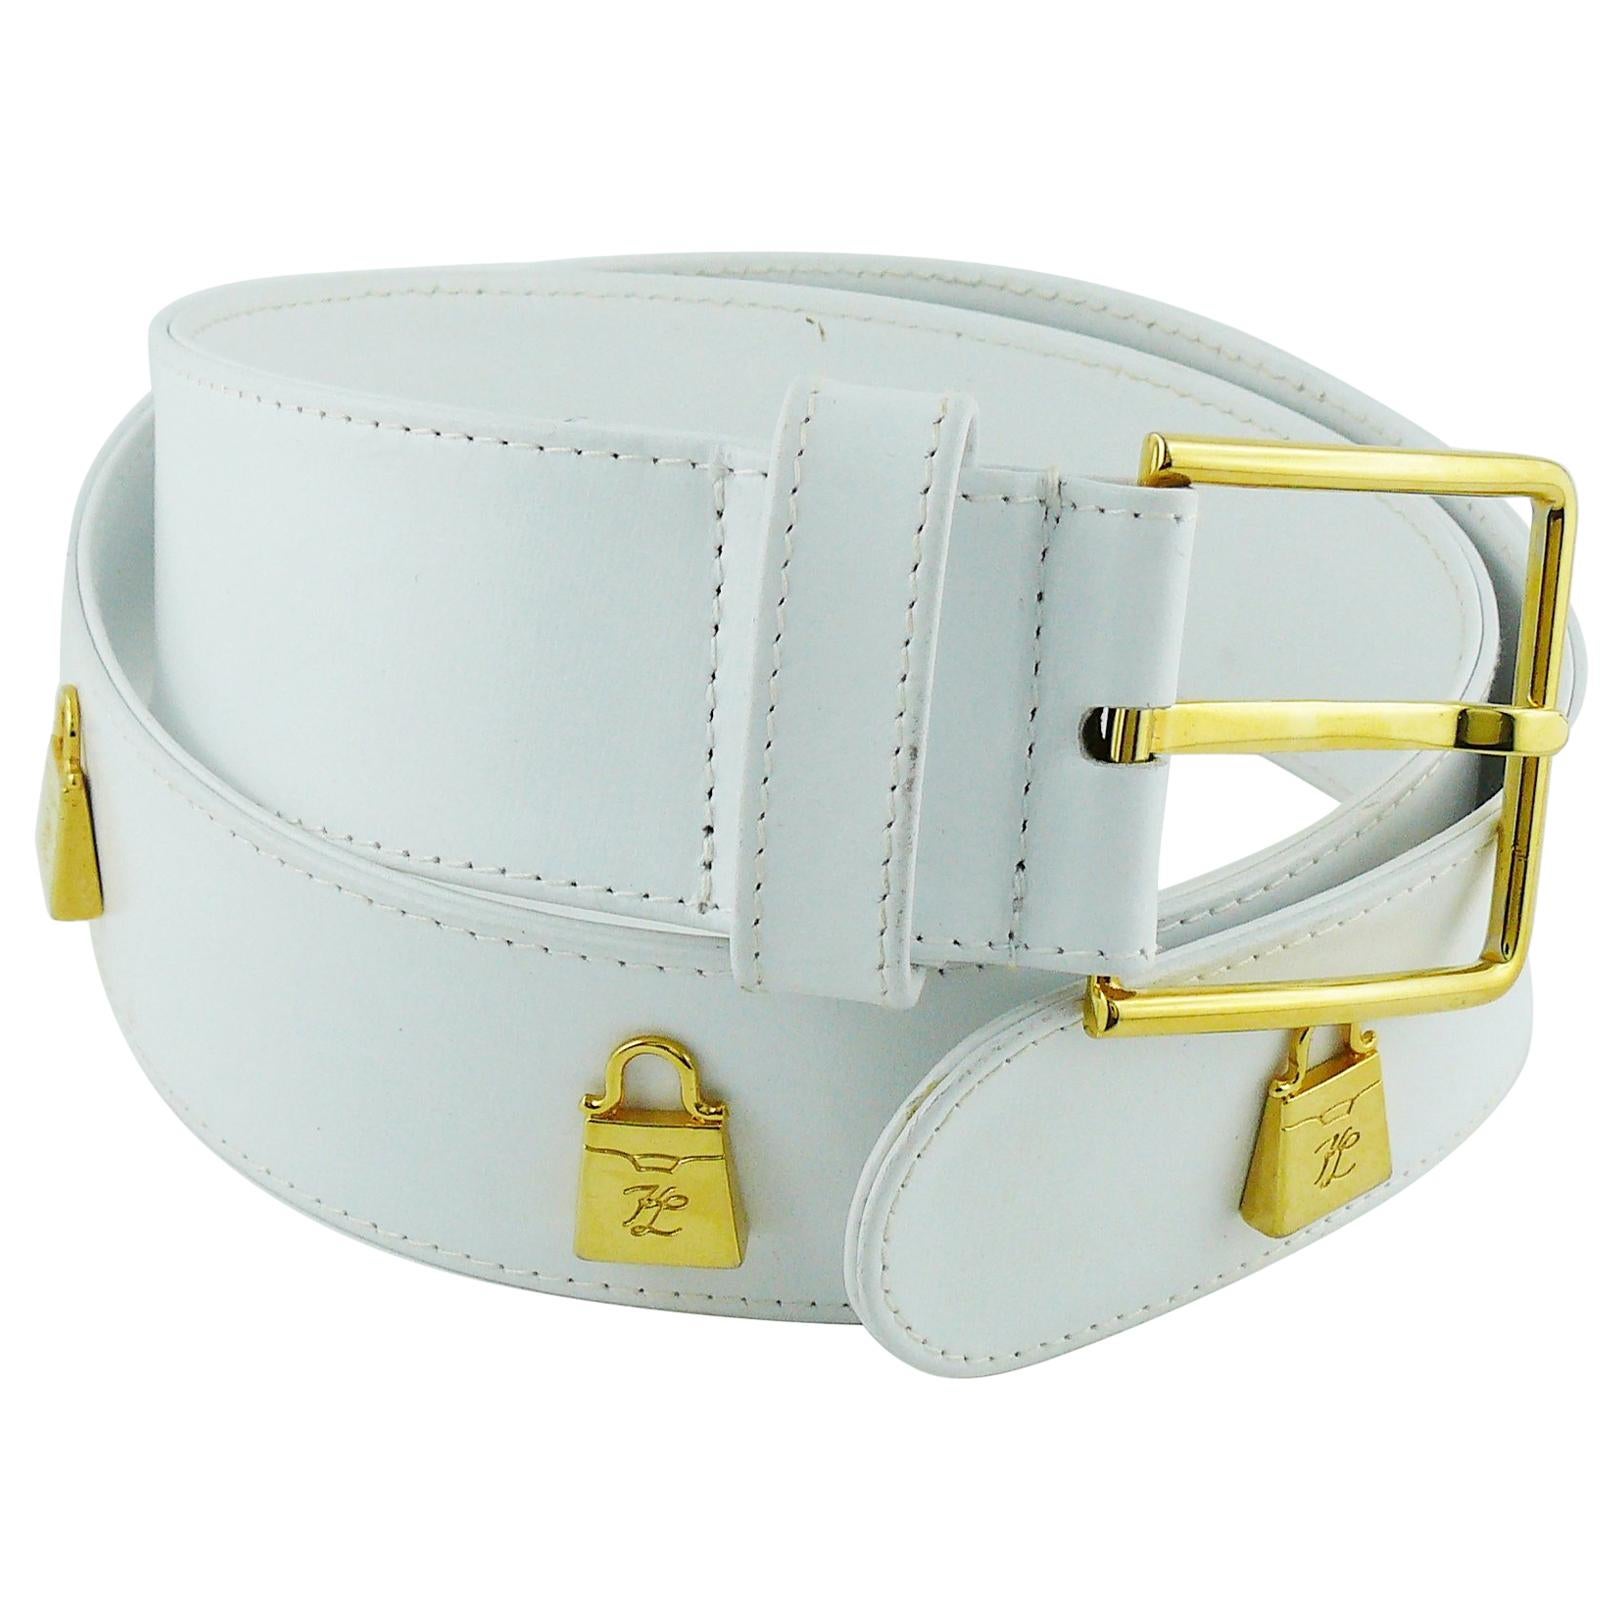 Karl Lagerfeld Vintage White Leather Belt with Gold Toned Handbags